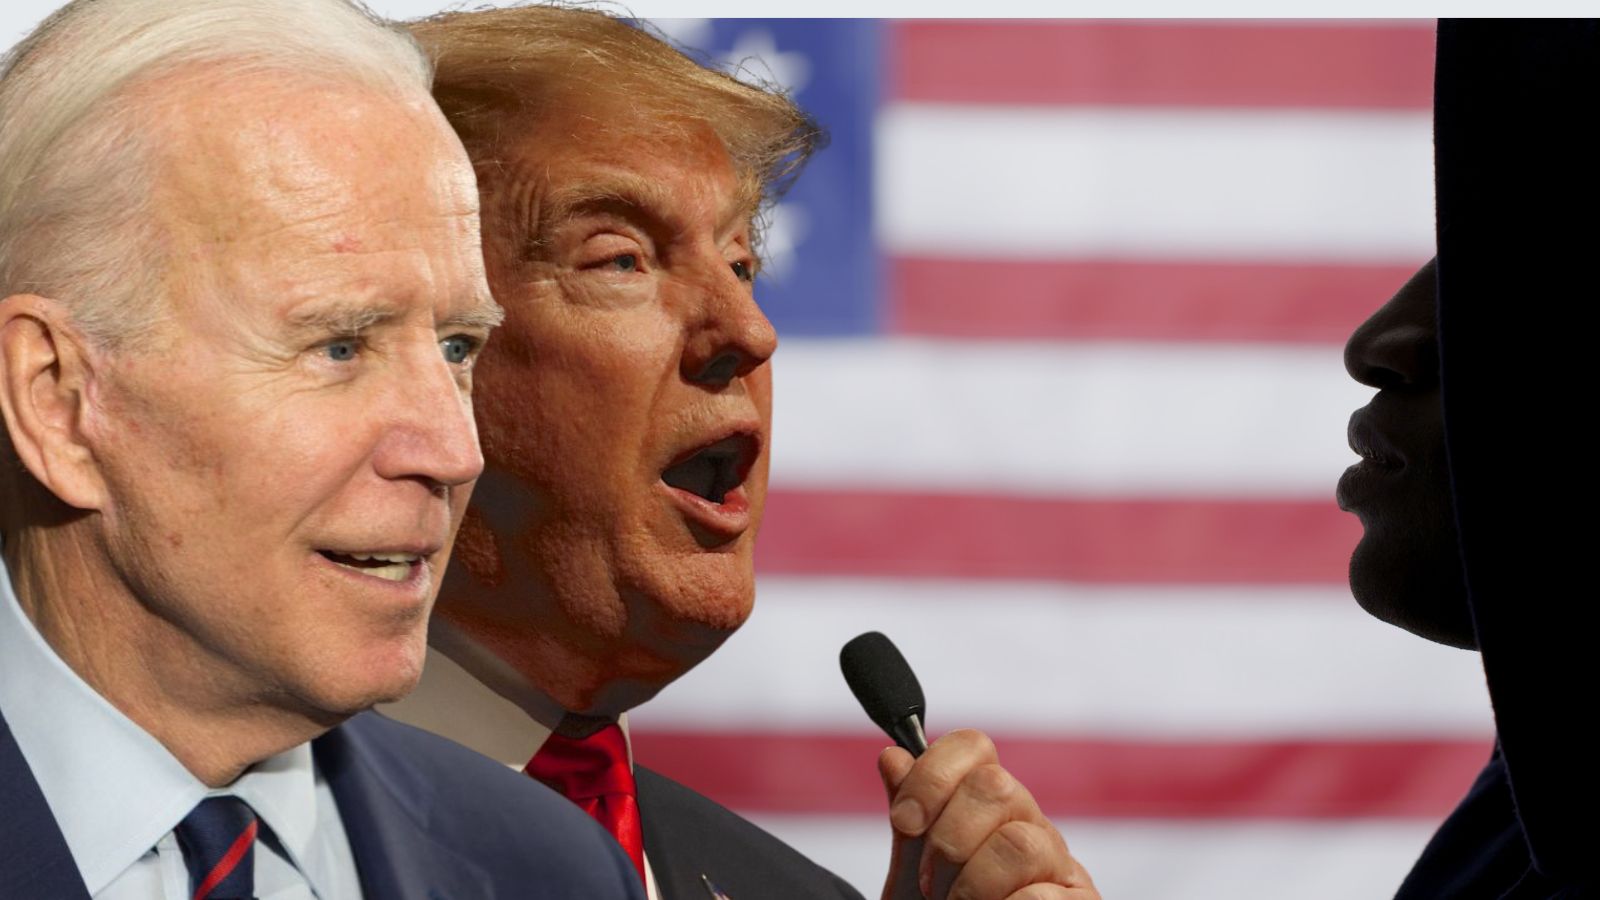 “Biden Is at a Uniquely Low Point in His Presidency”: Black Voters Are Shifting to Team Trump